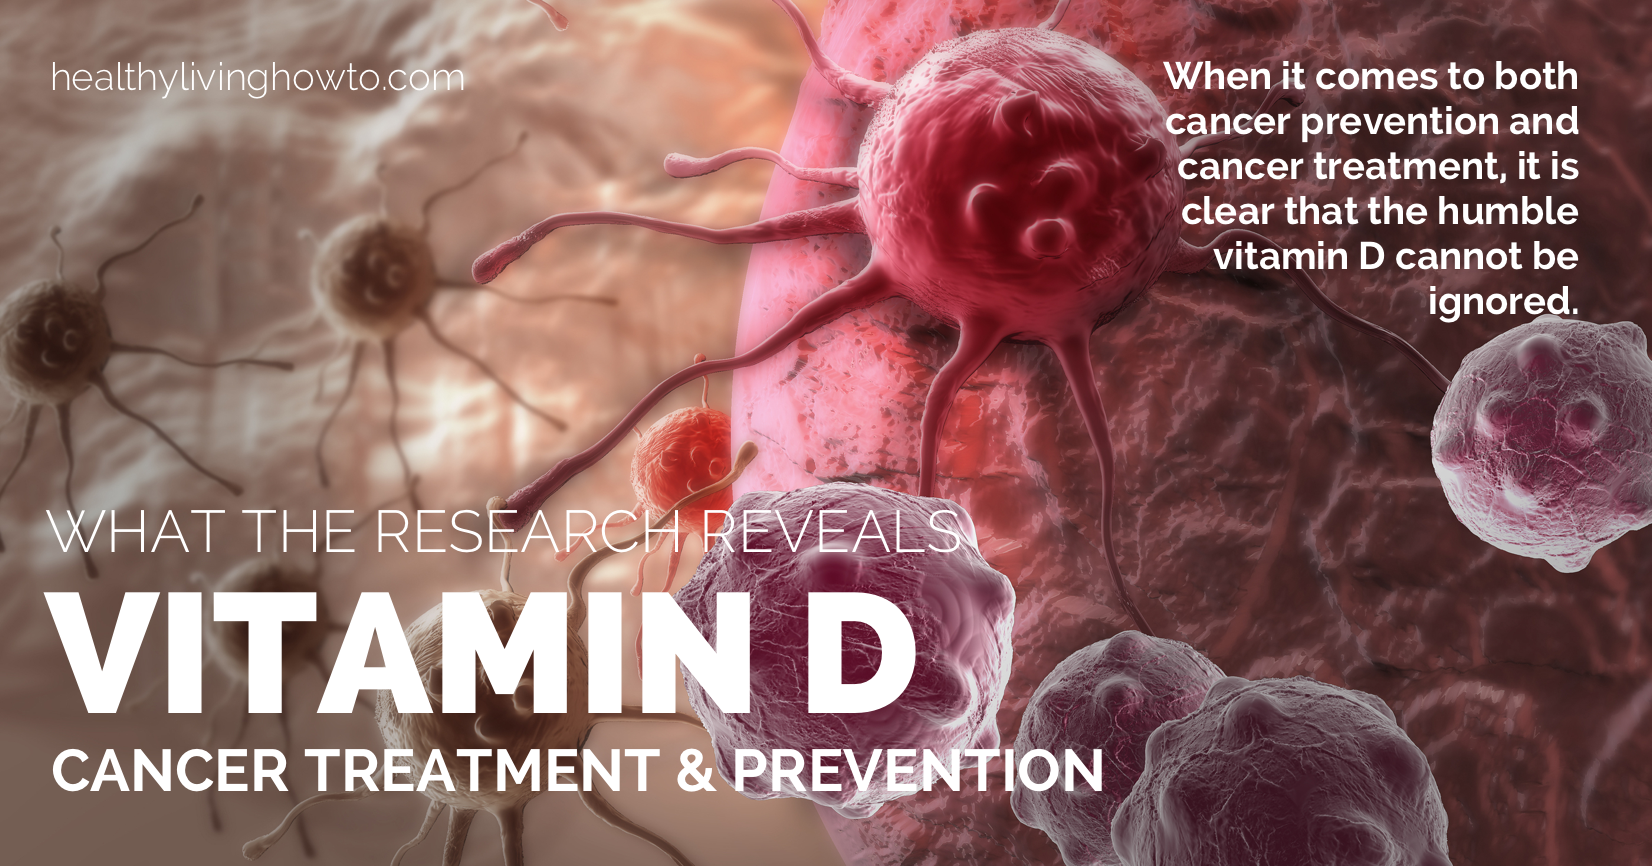 Vitamin D. Cancer Treatment & Prevention | healthylivinghowto.com